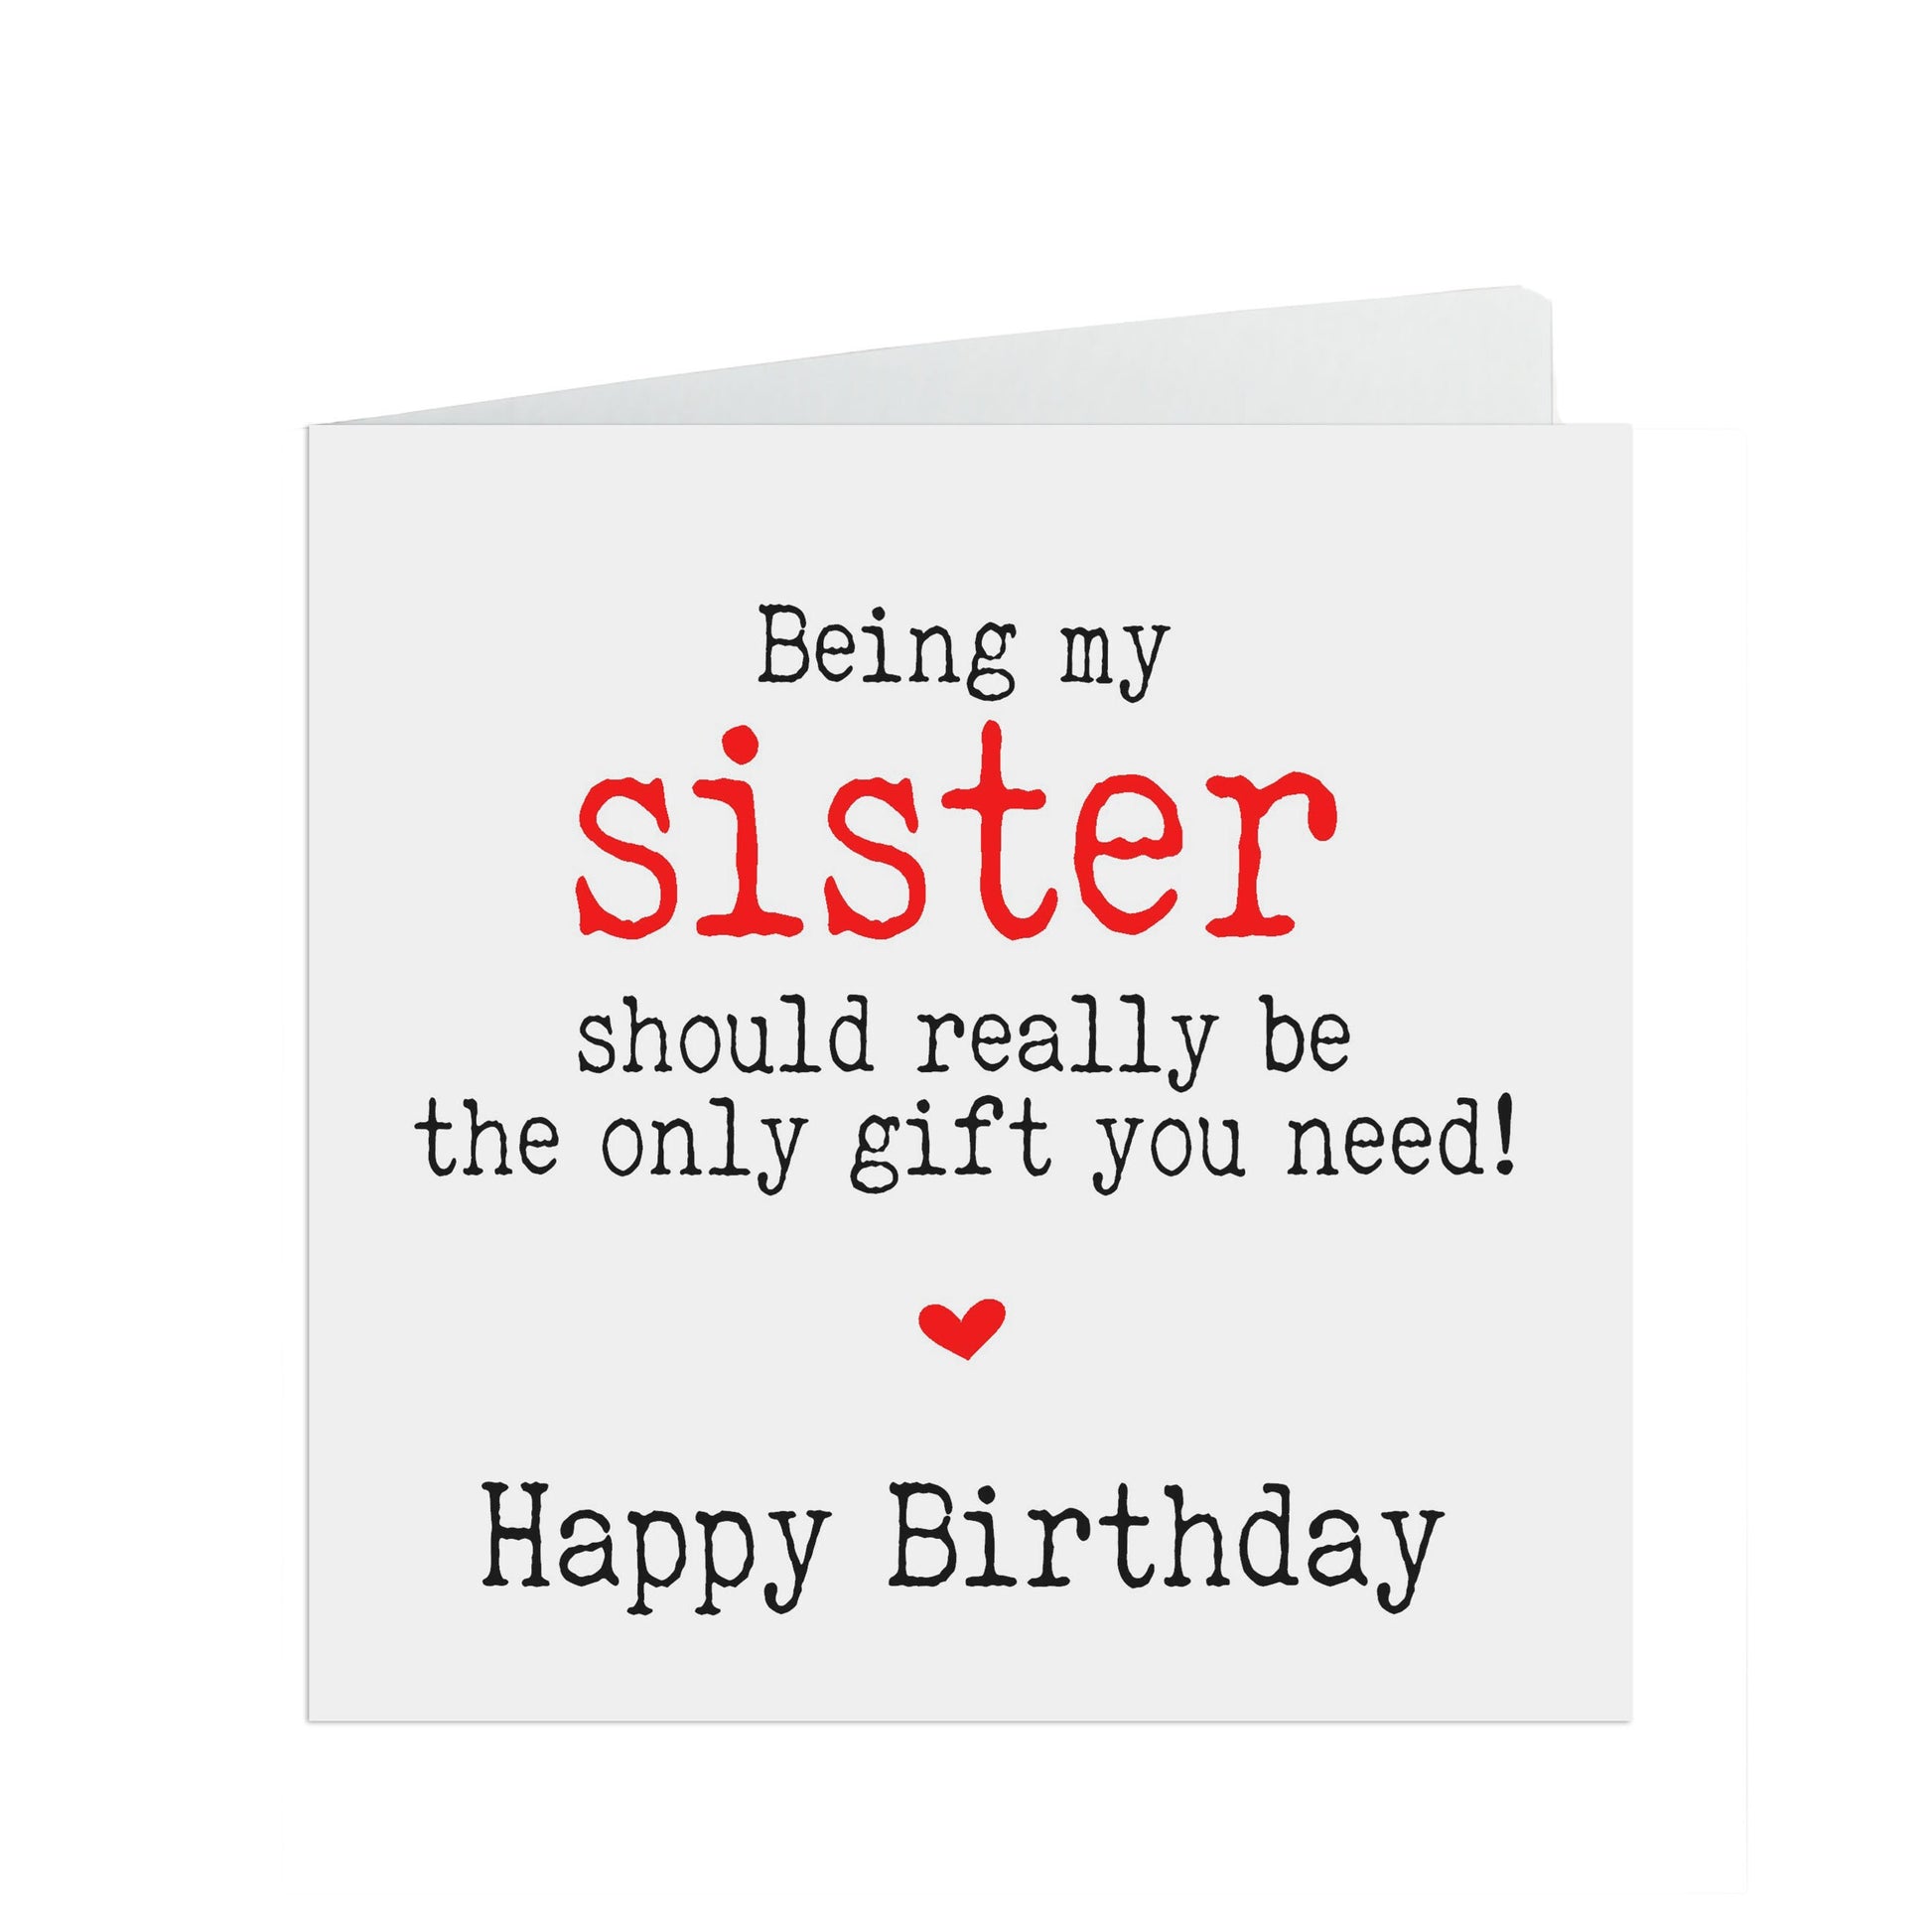 Funny Sister Birthday Card, Being My Sister Should Really Be The Only Gift You Need!